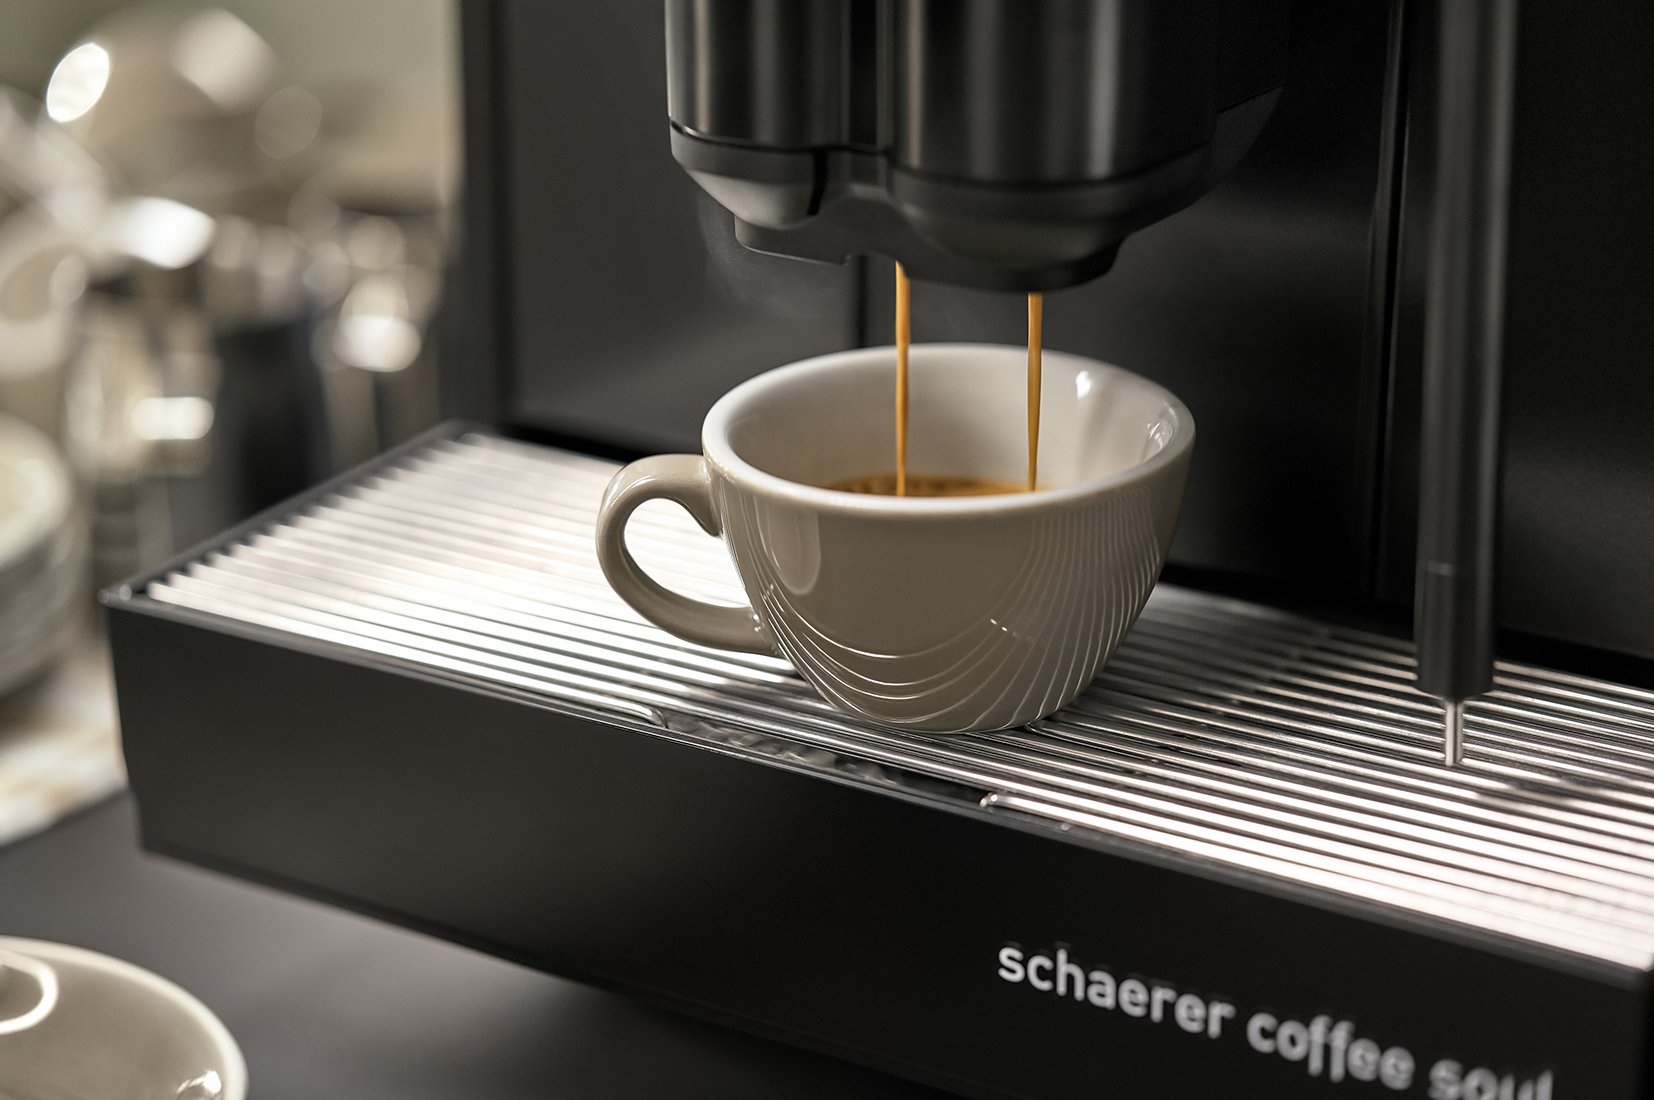 Schaerer_Coffee_Machines_Soul_2-step_Shooting_Image_Ambient_Espresso-Brewing_RGB_low-res.jpg